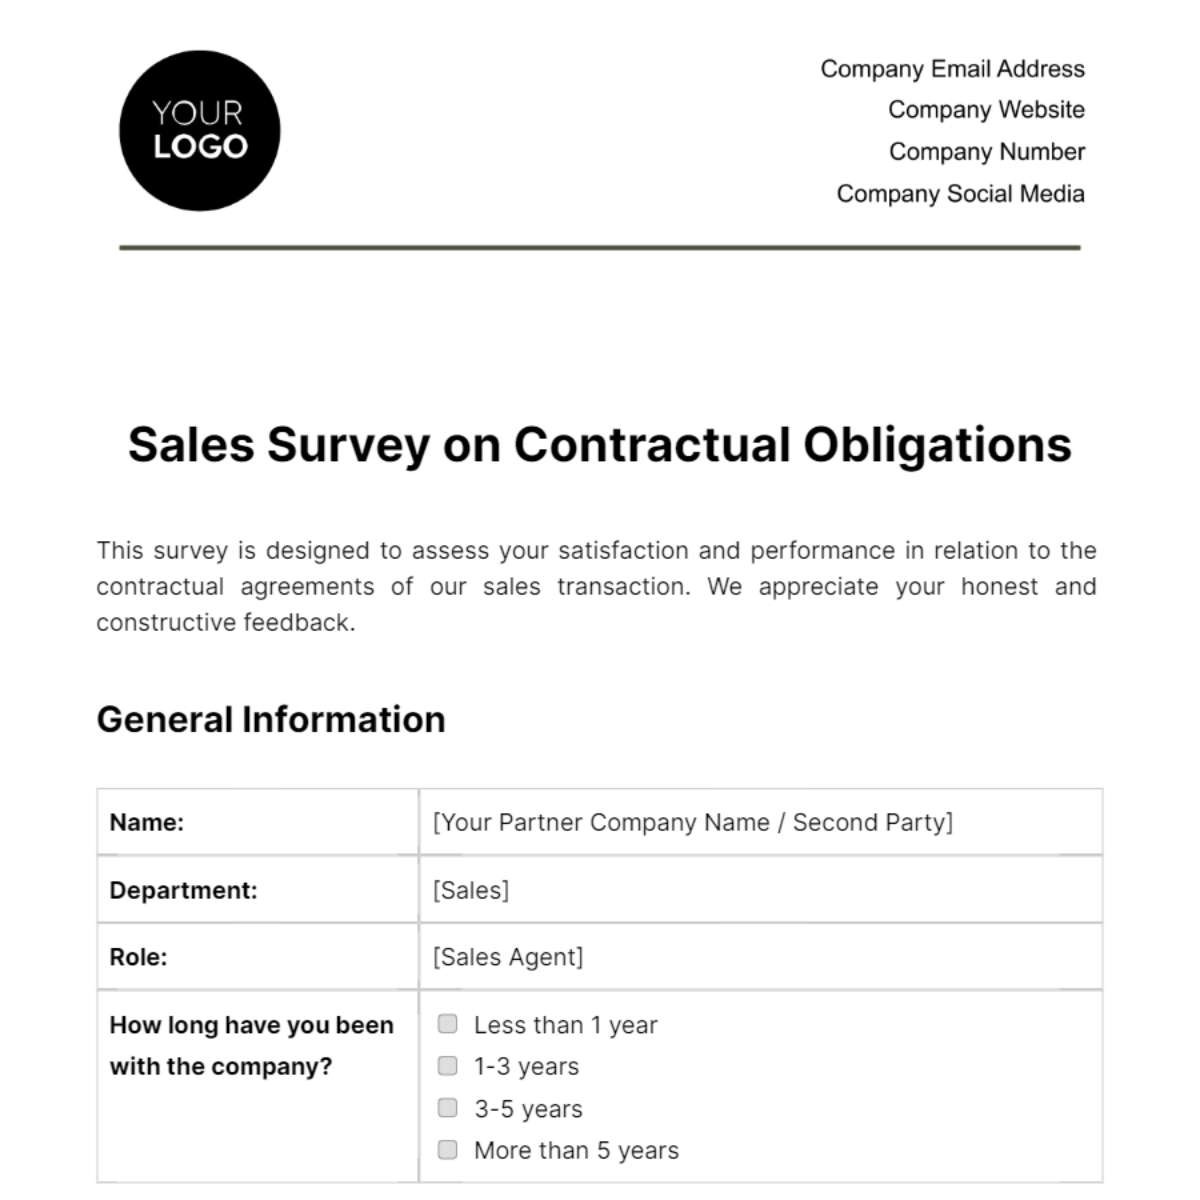 Free Sales Survey on Contractual Obligations Template